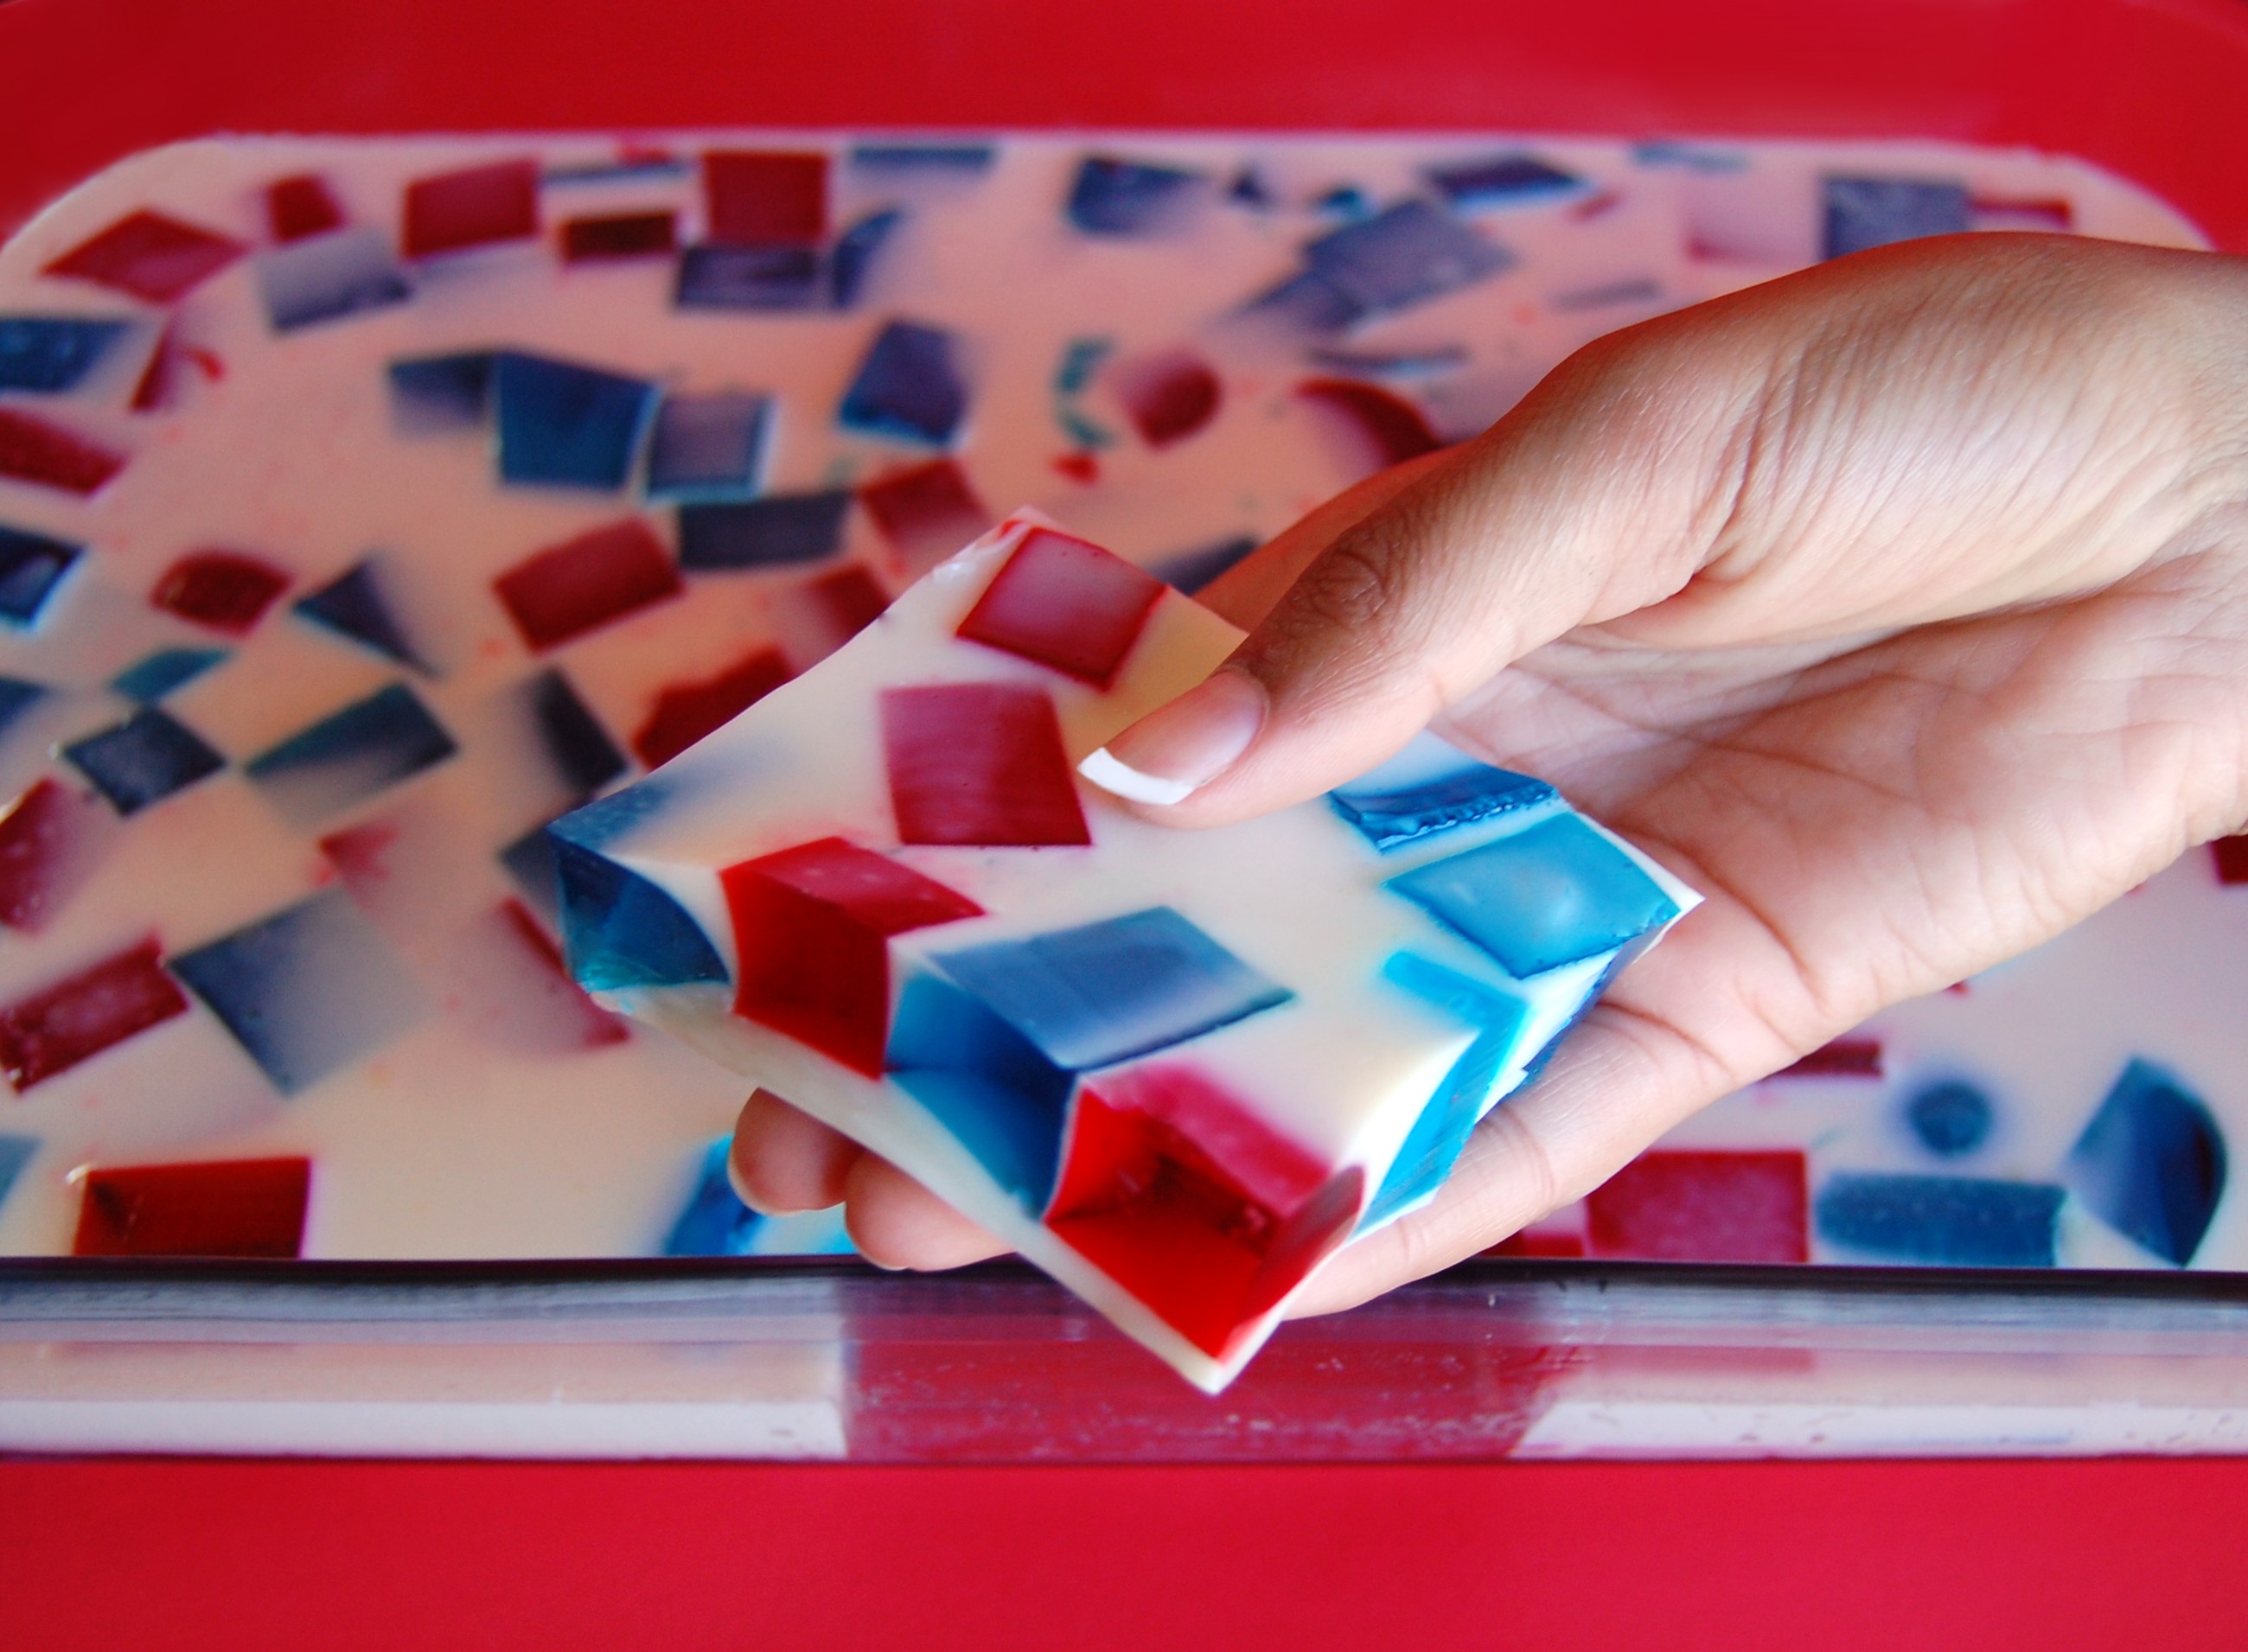 https://www.cookingmamas.com/wp-content/uploads/2018/06/Red-White-and-Blue-Mosaic-Jello-2.jpg